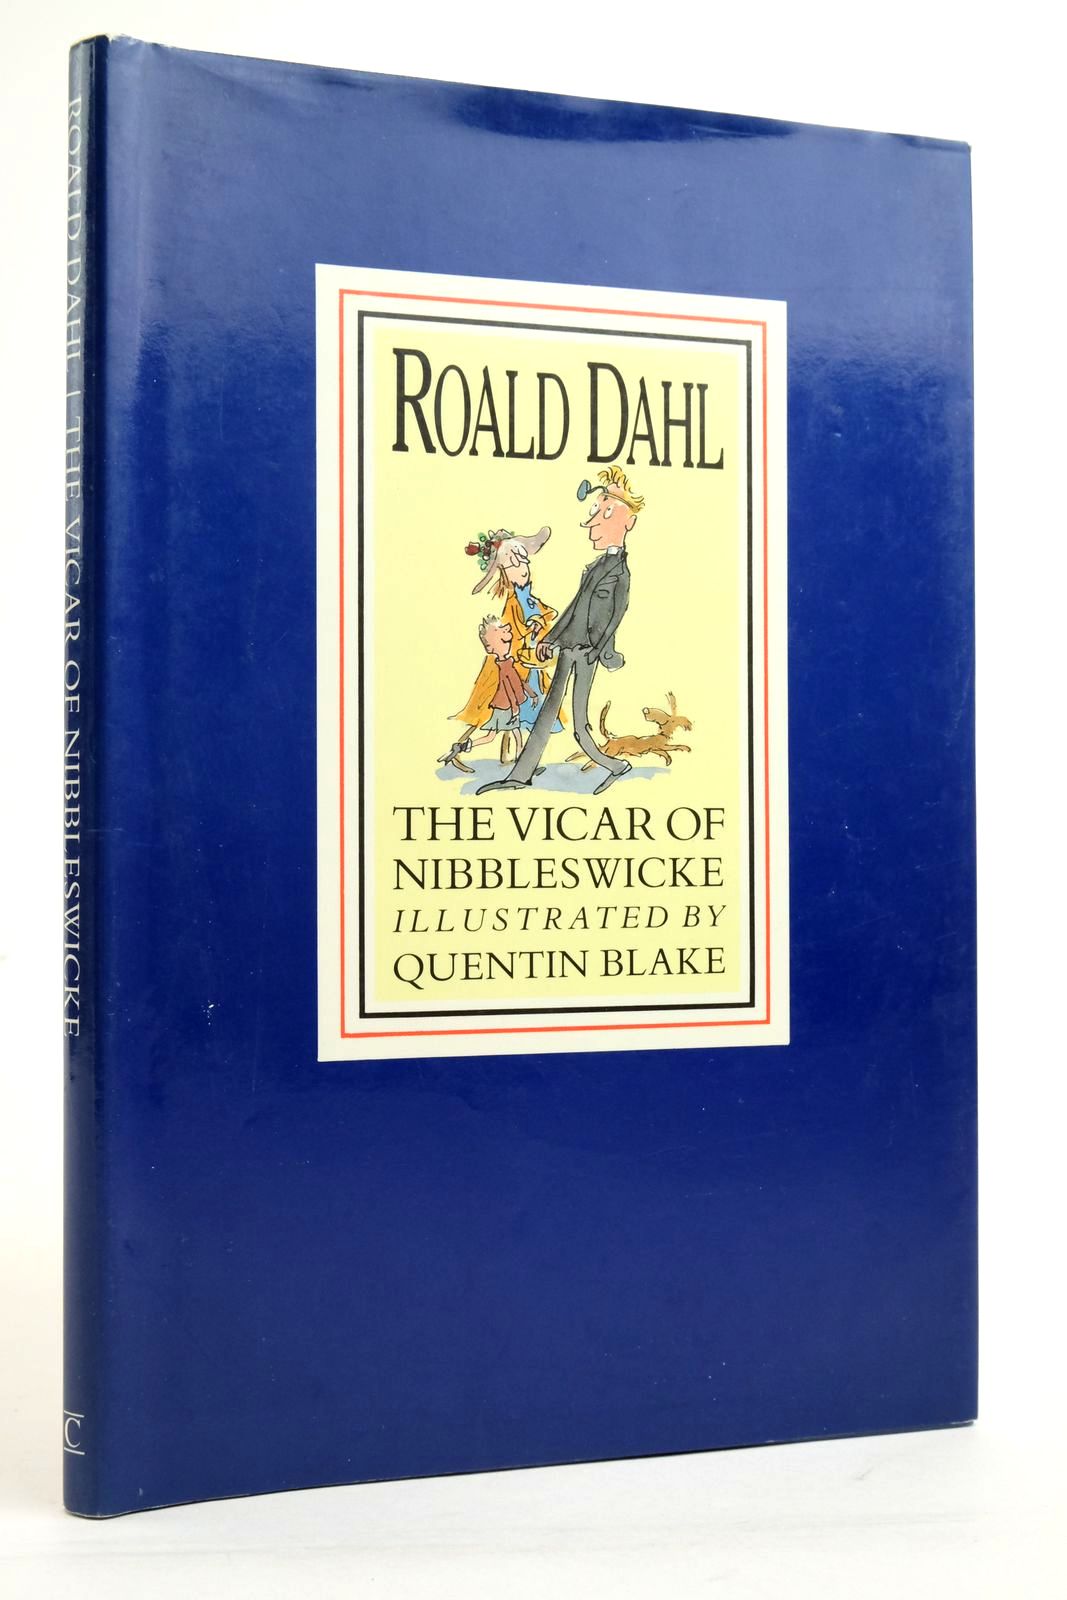 Photo of THE VICAR OF NIBBLESWICKE written by Dahl, Roald illustrated by Blake, Quentin published by Century Publishing (STOCK CODE: 2136300)  for sale by Stella & Rose's Books